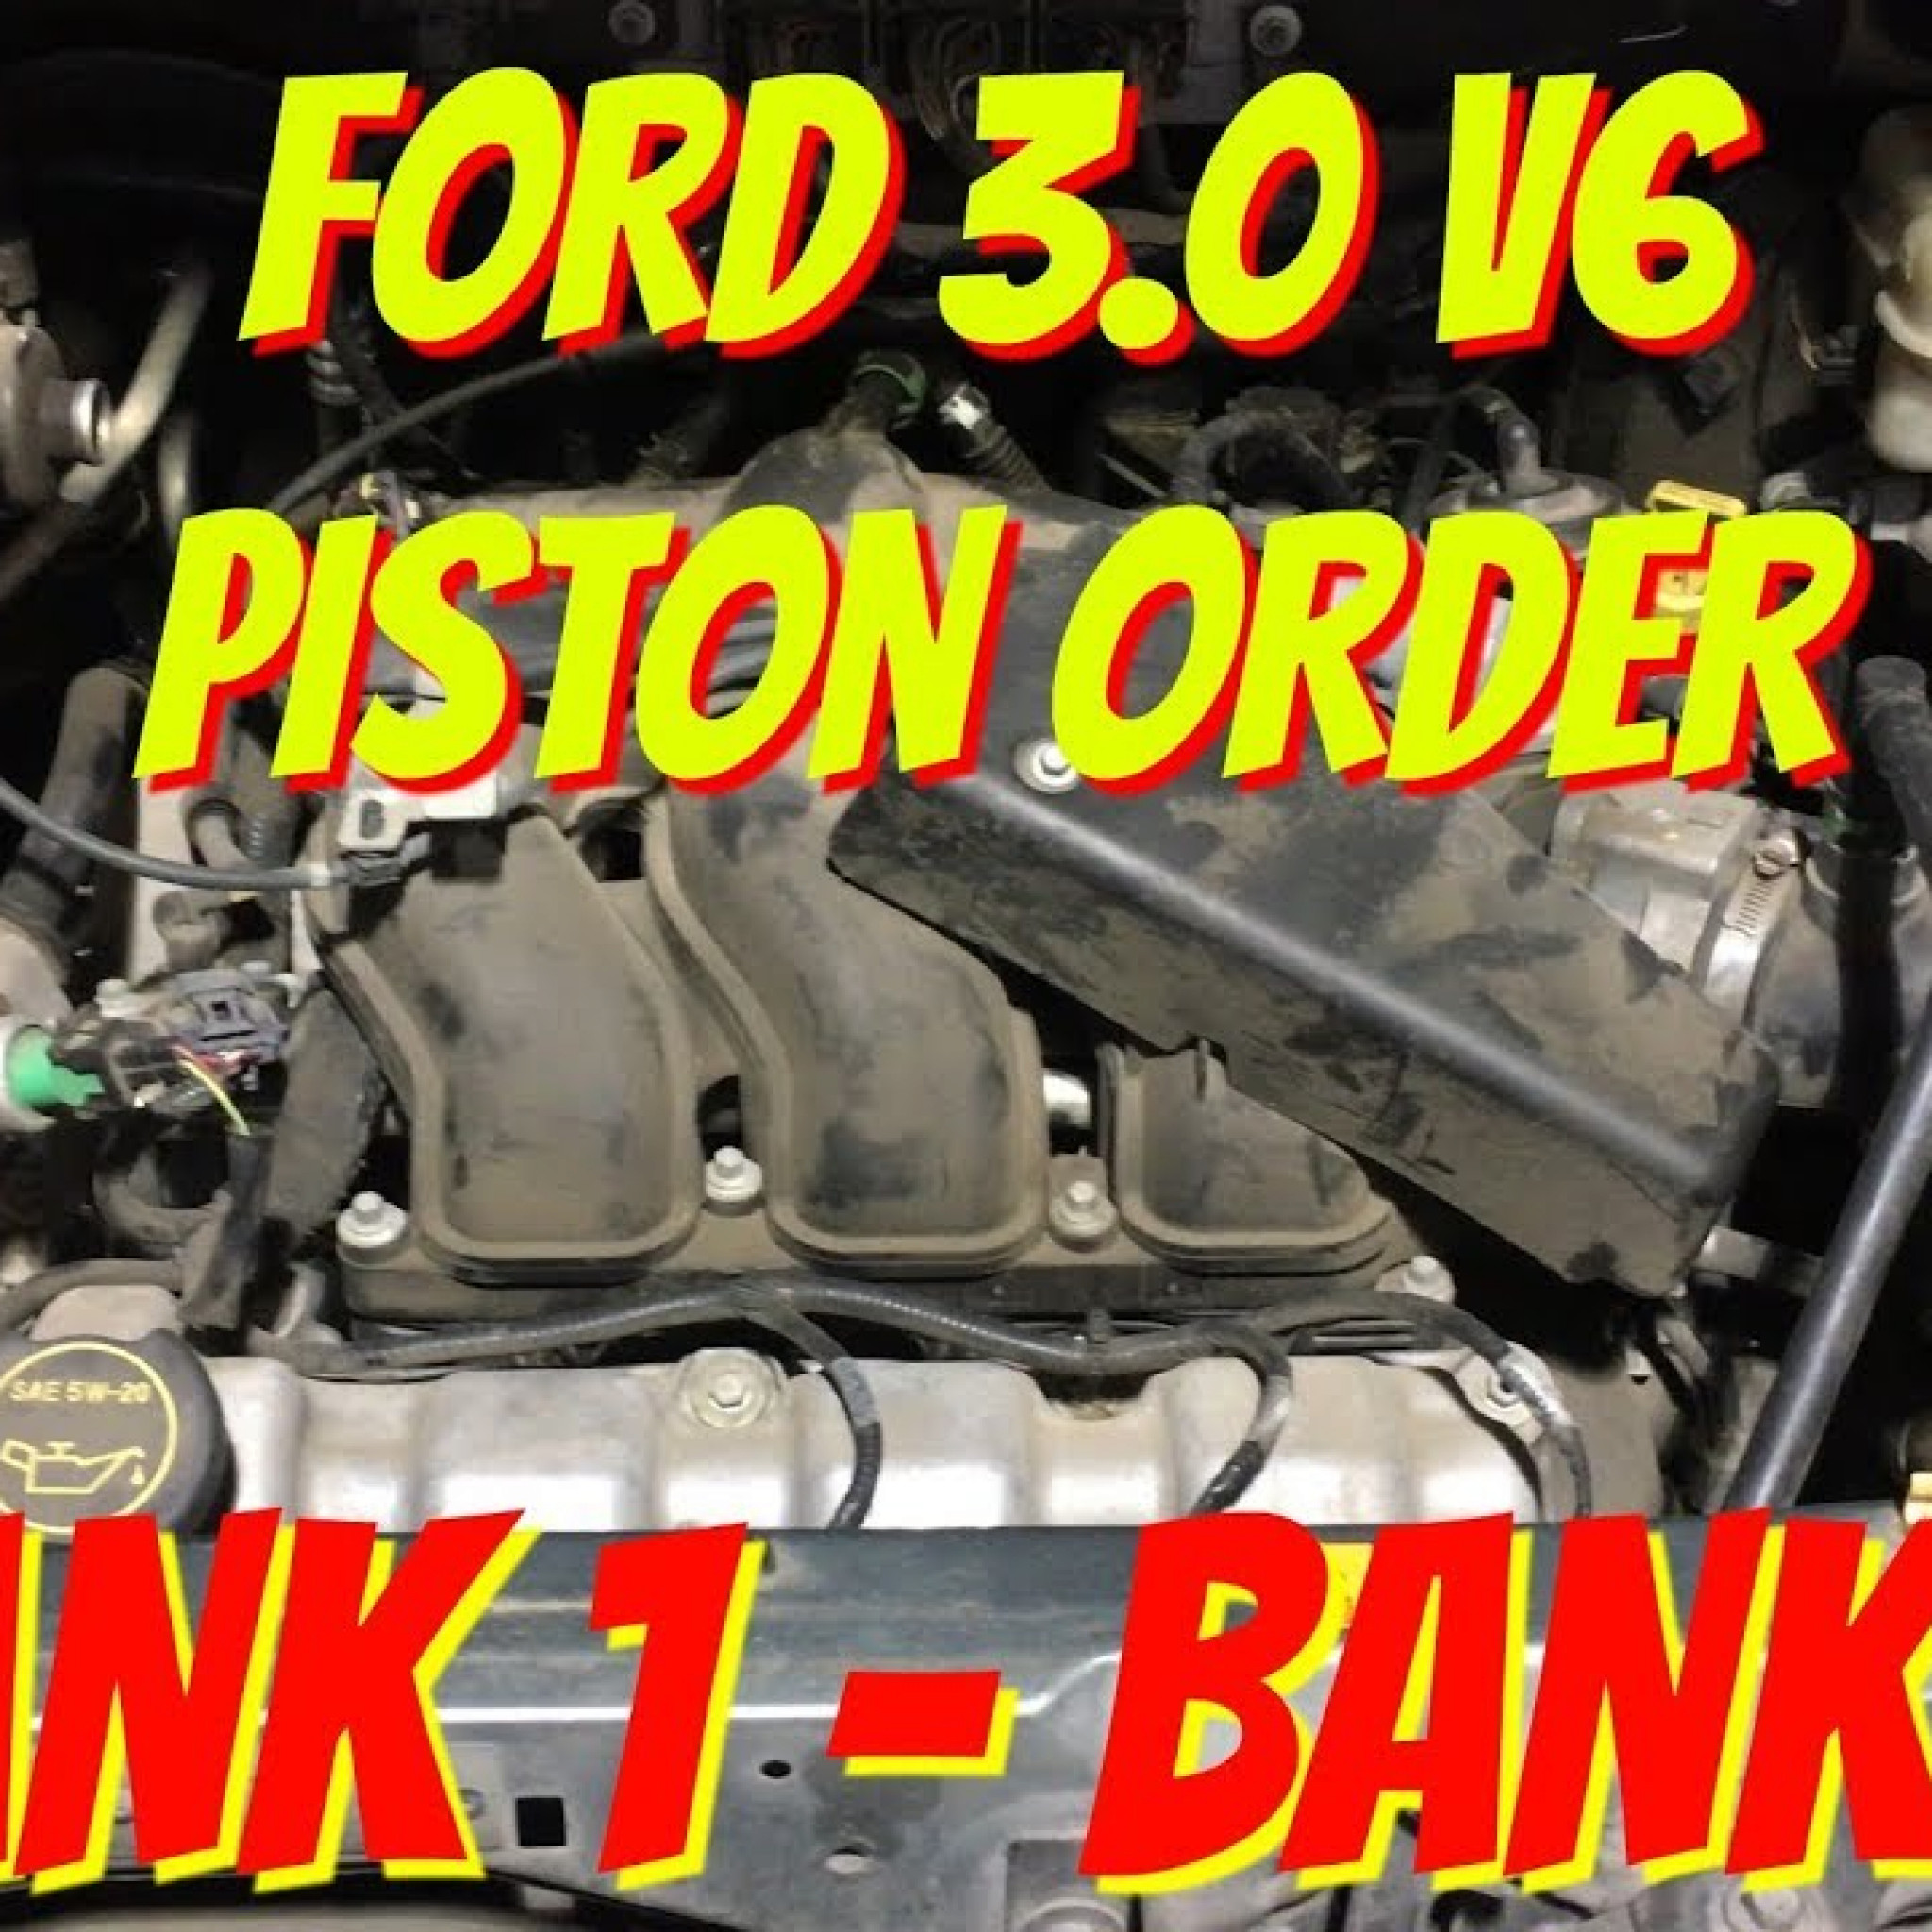 2005 Ford Escape V6 Firing Order | Wiring and Printable